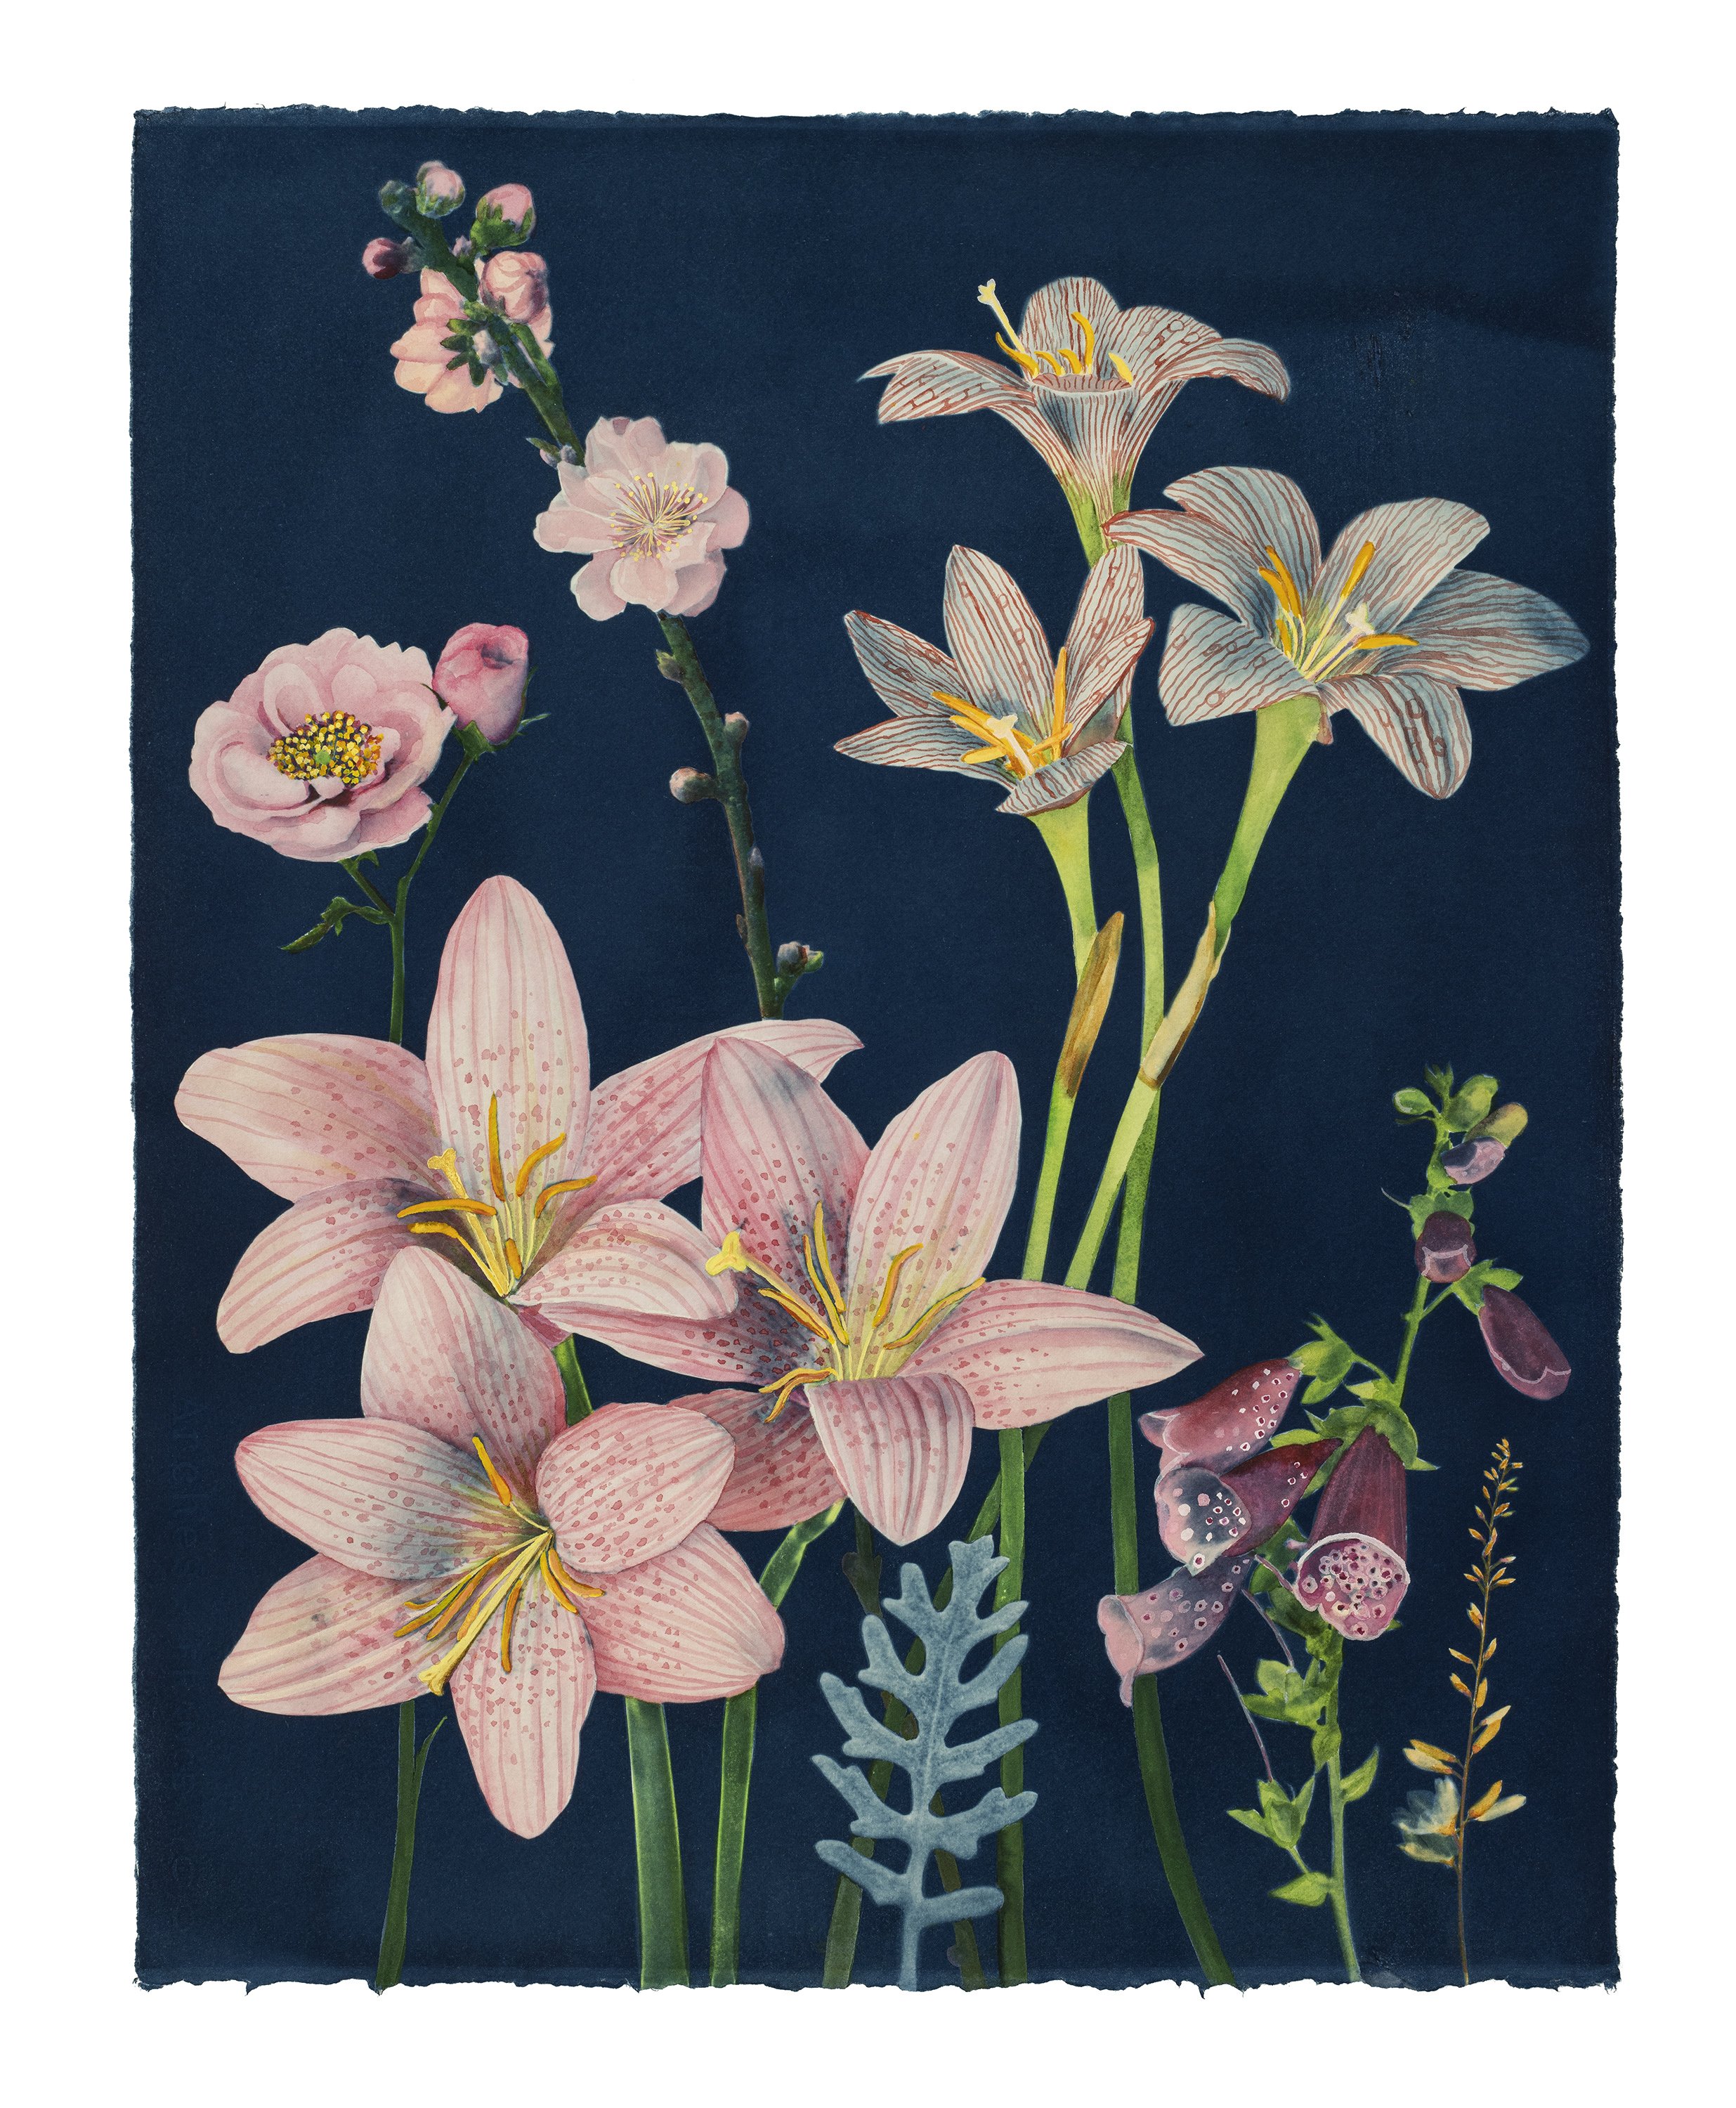 Picturesque Botany (Lily, Rose, Cherry Blossom, Foxglove, Dusty Miller, etc)